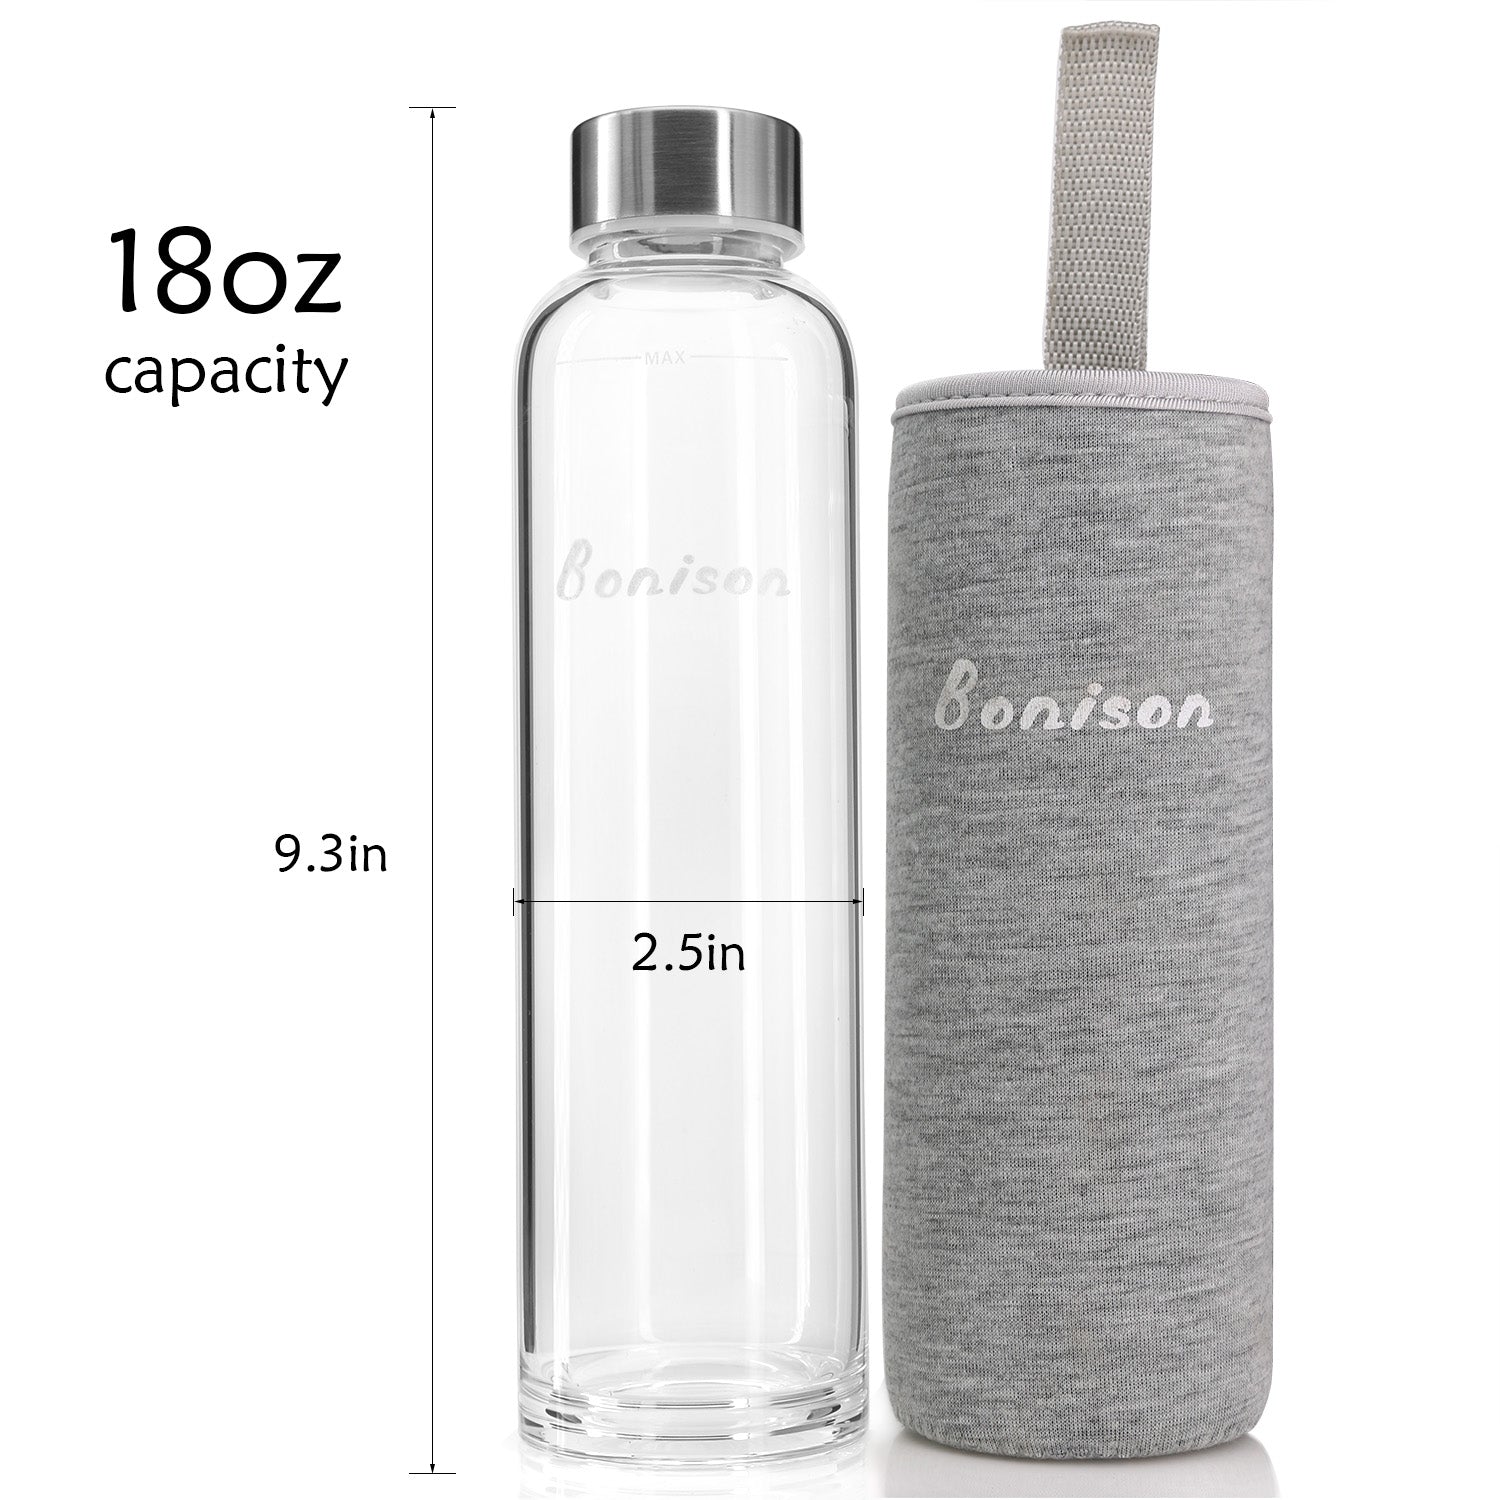 18.5 Oz Borosilicate Glass Water Bottle with Assorted Colorful Nylon  Sleeve, Extra Thick Base, BPA Free, Crystal Clear, Trendy Design – TOPOKO